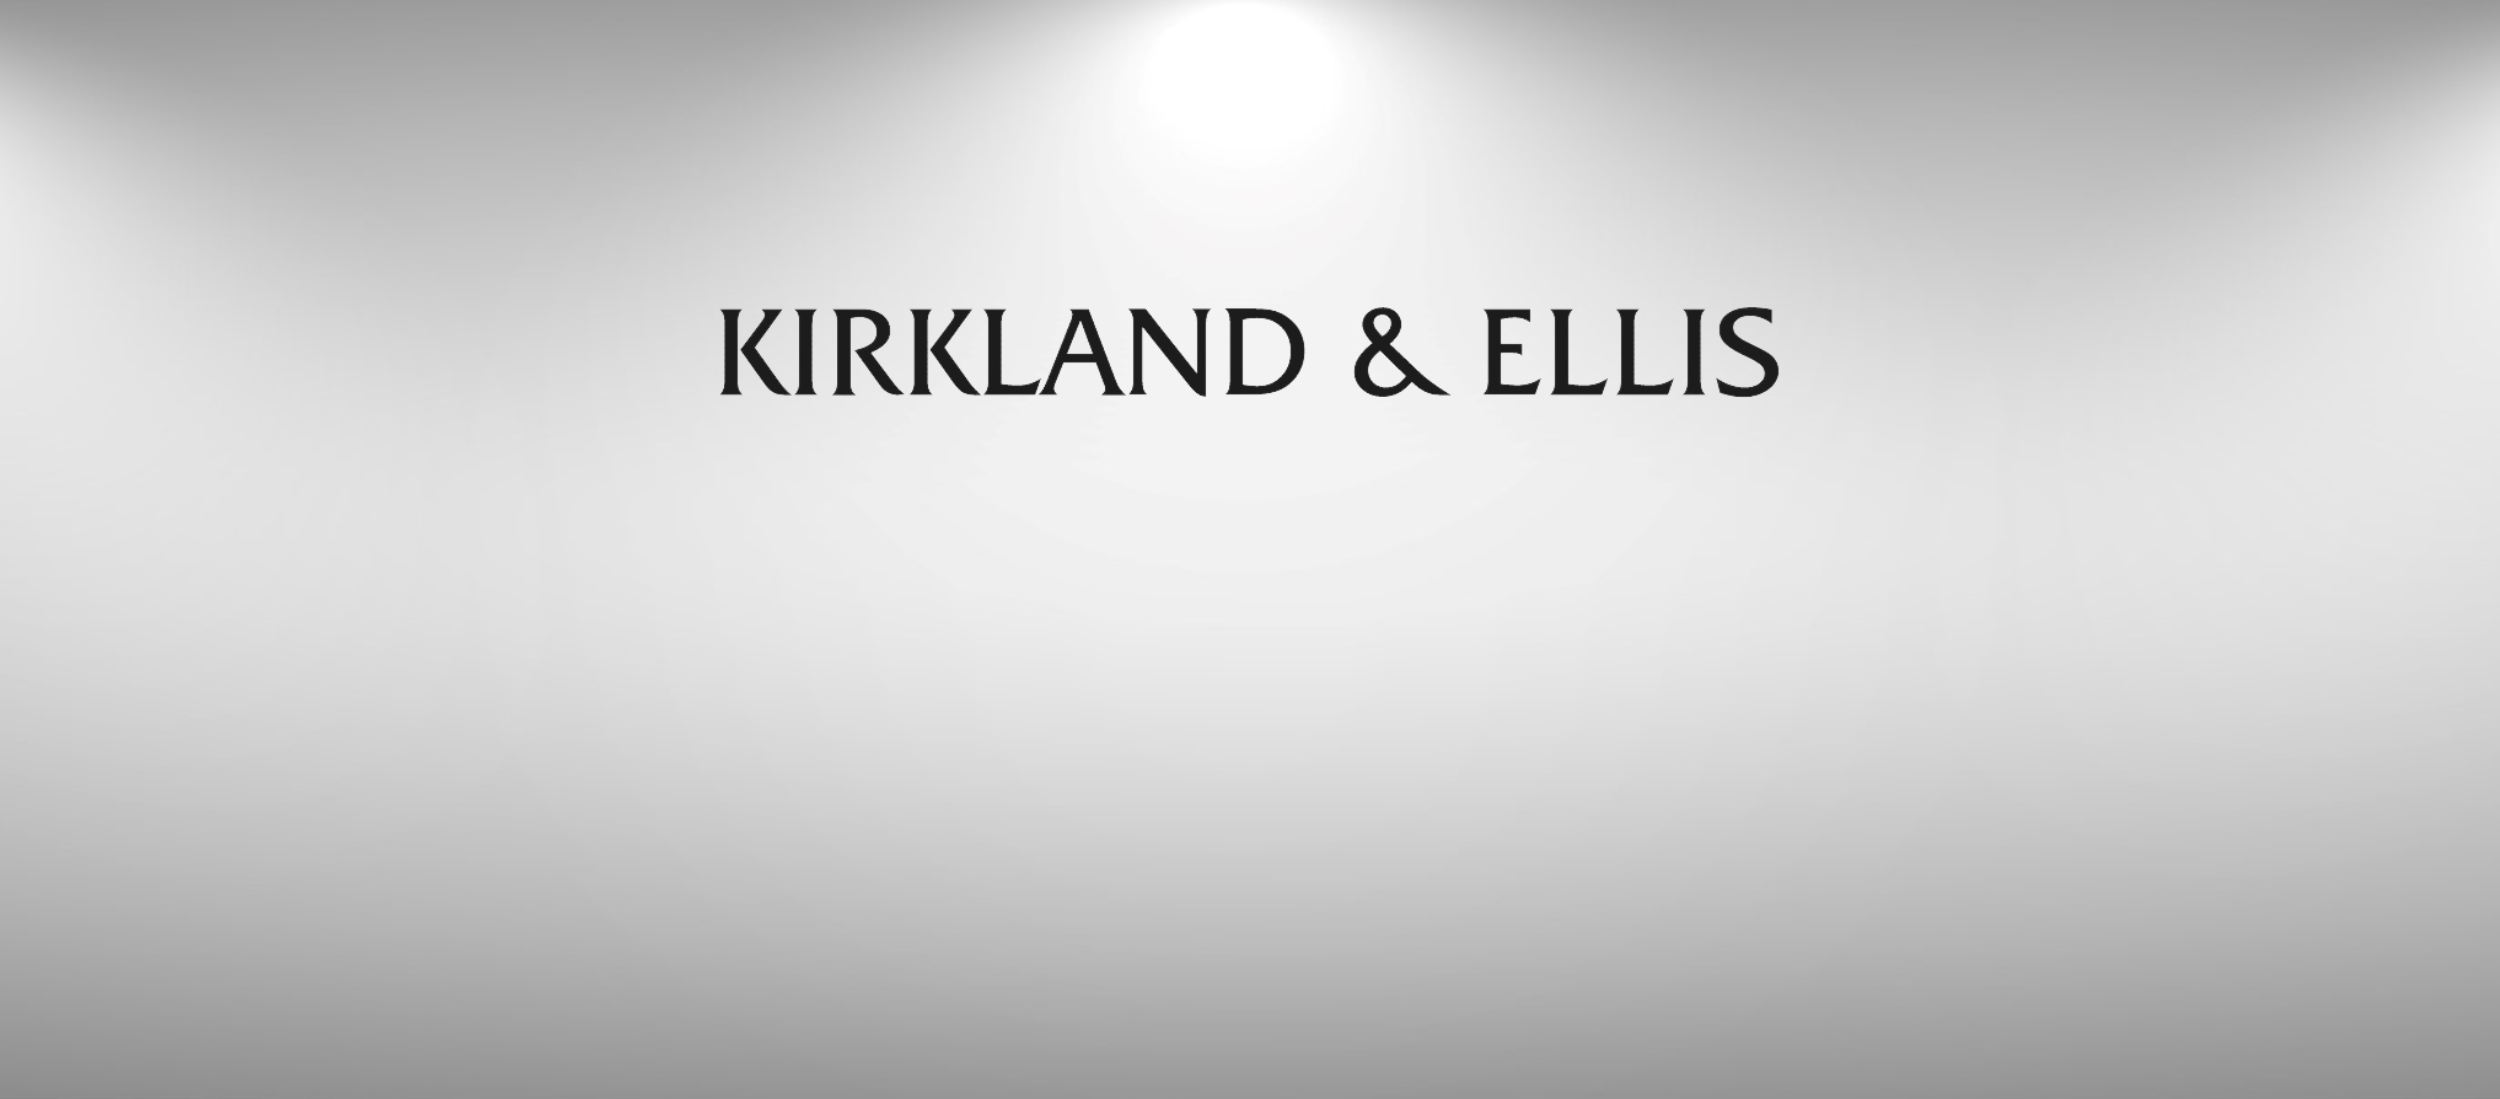 This is Why Kirkland & Ellis is About to Get A lot Better at Client Service